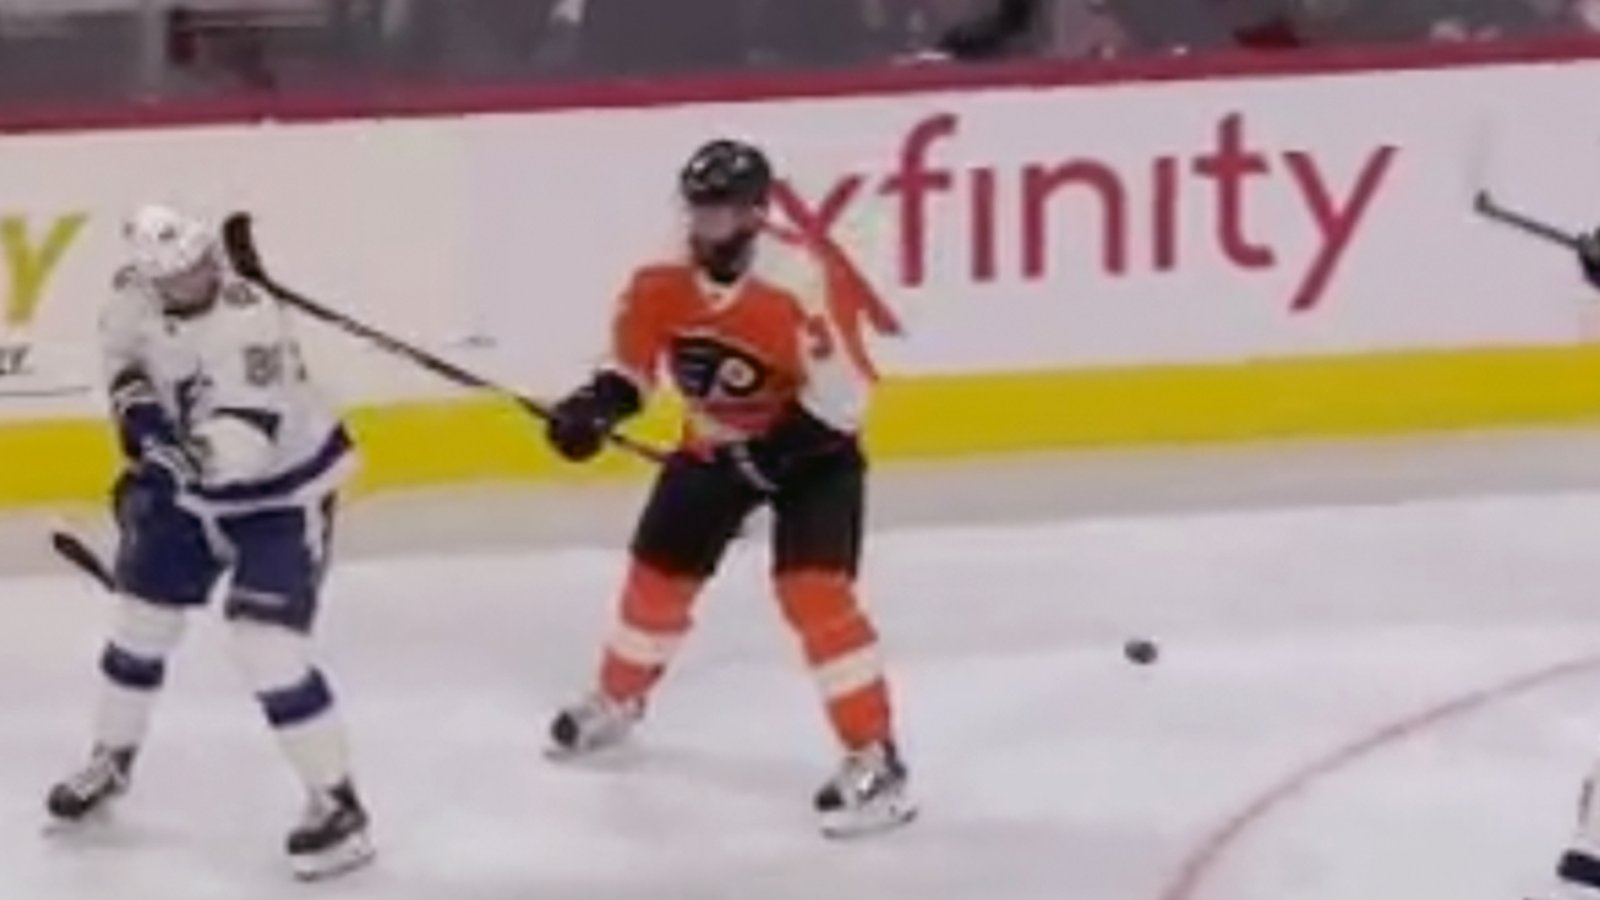 Breaking: Suspension coming for Gudas after he chops Kucherov in the head